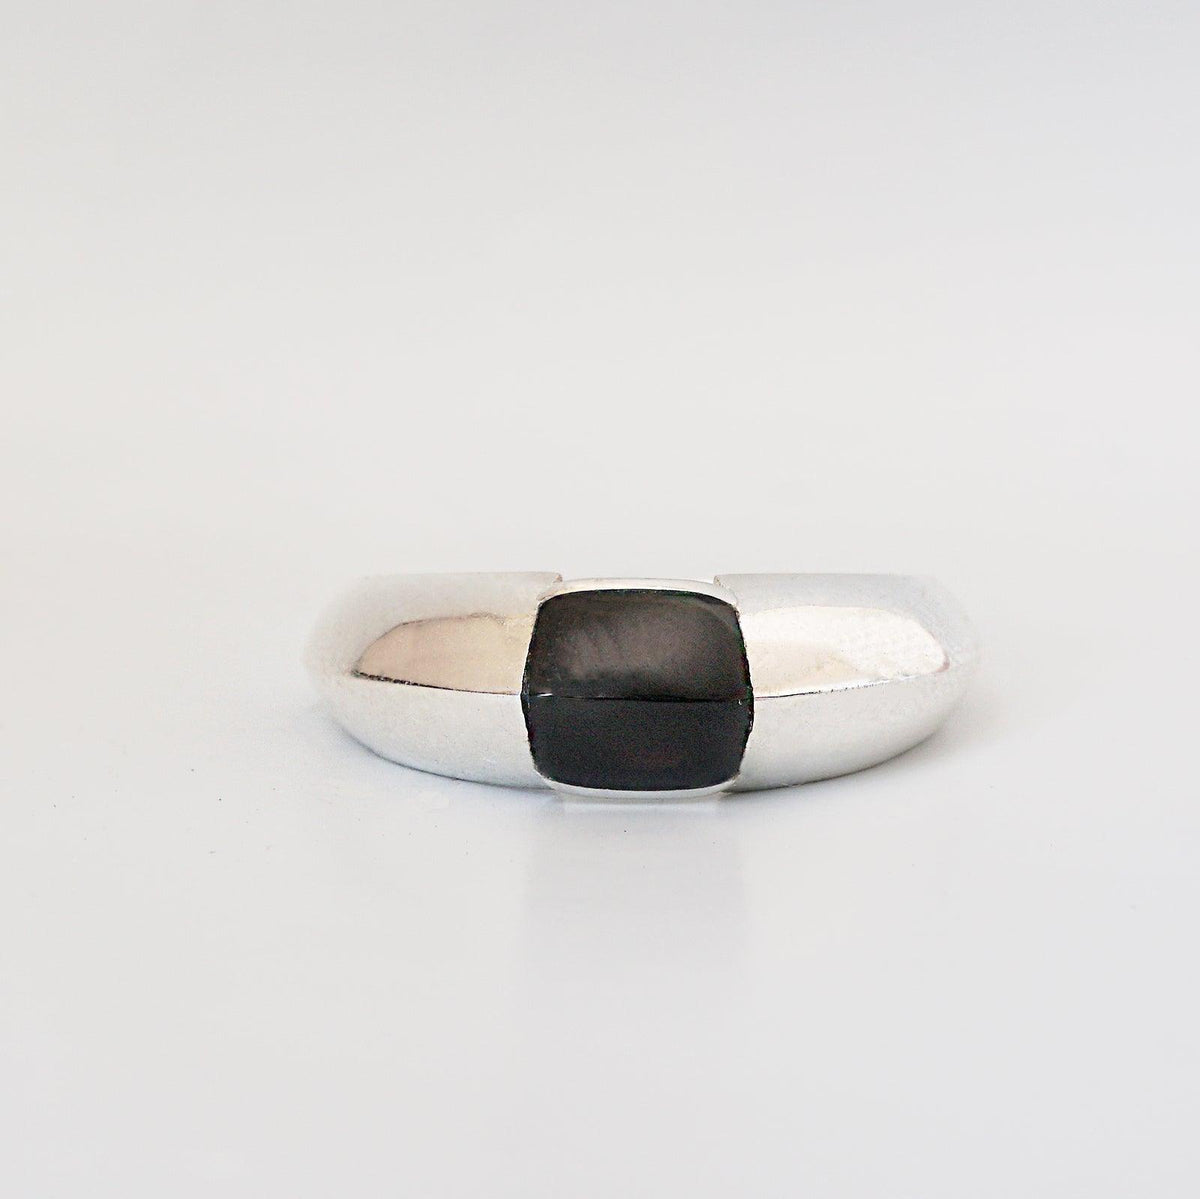 Black Onyx Bevel Ring in Sterling Silver and 14K Gold, 7mm